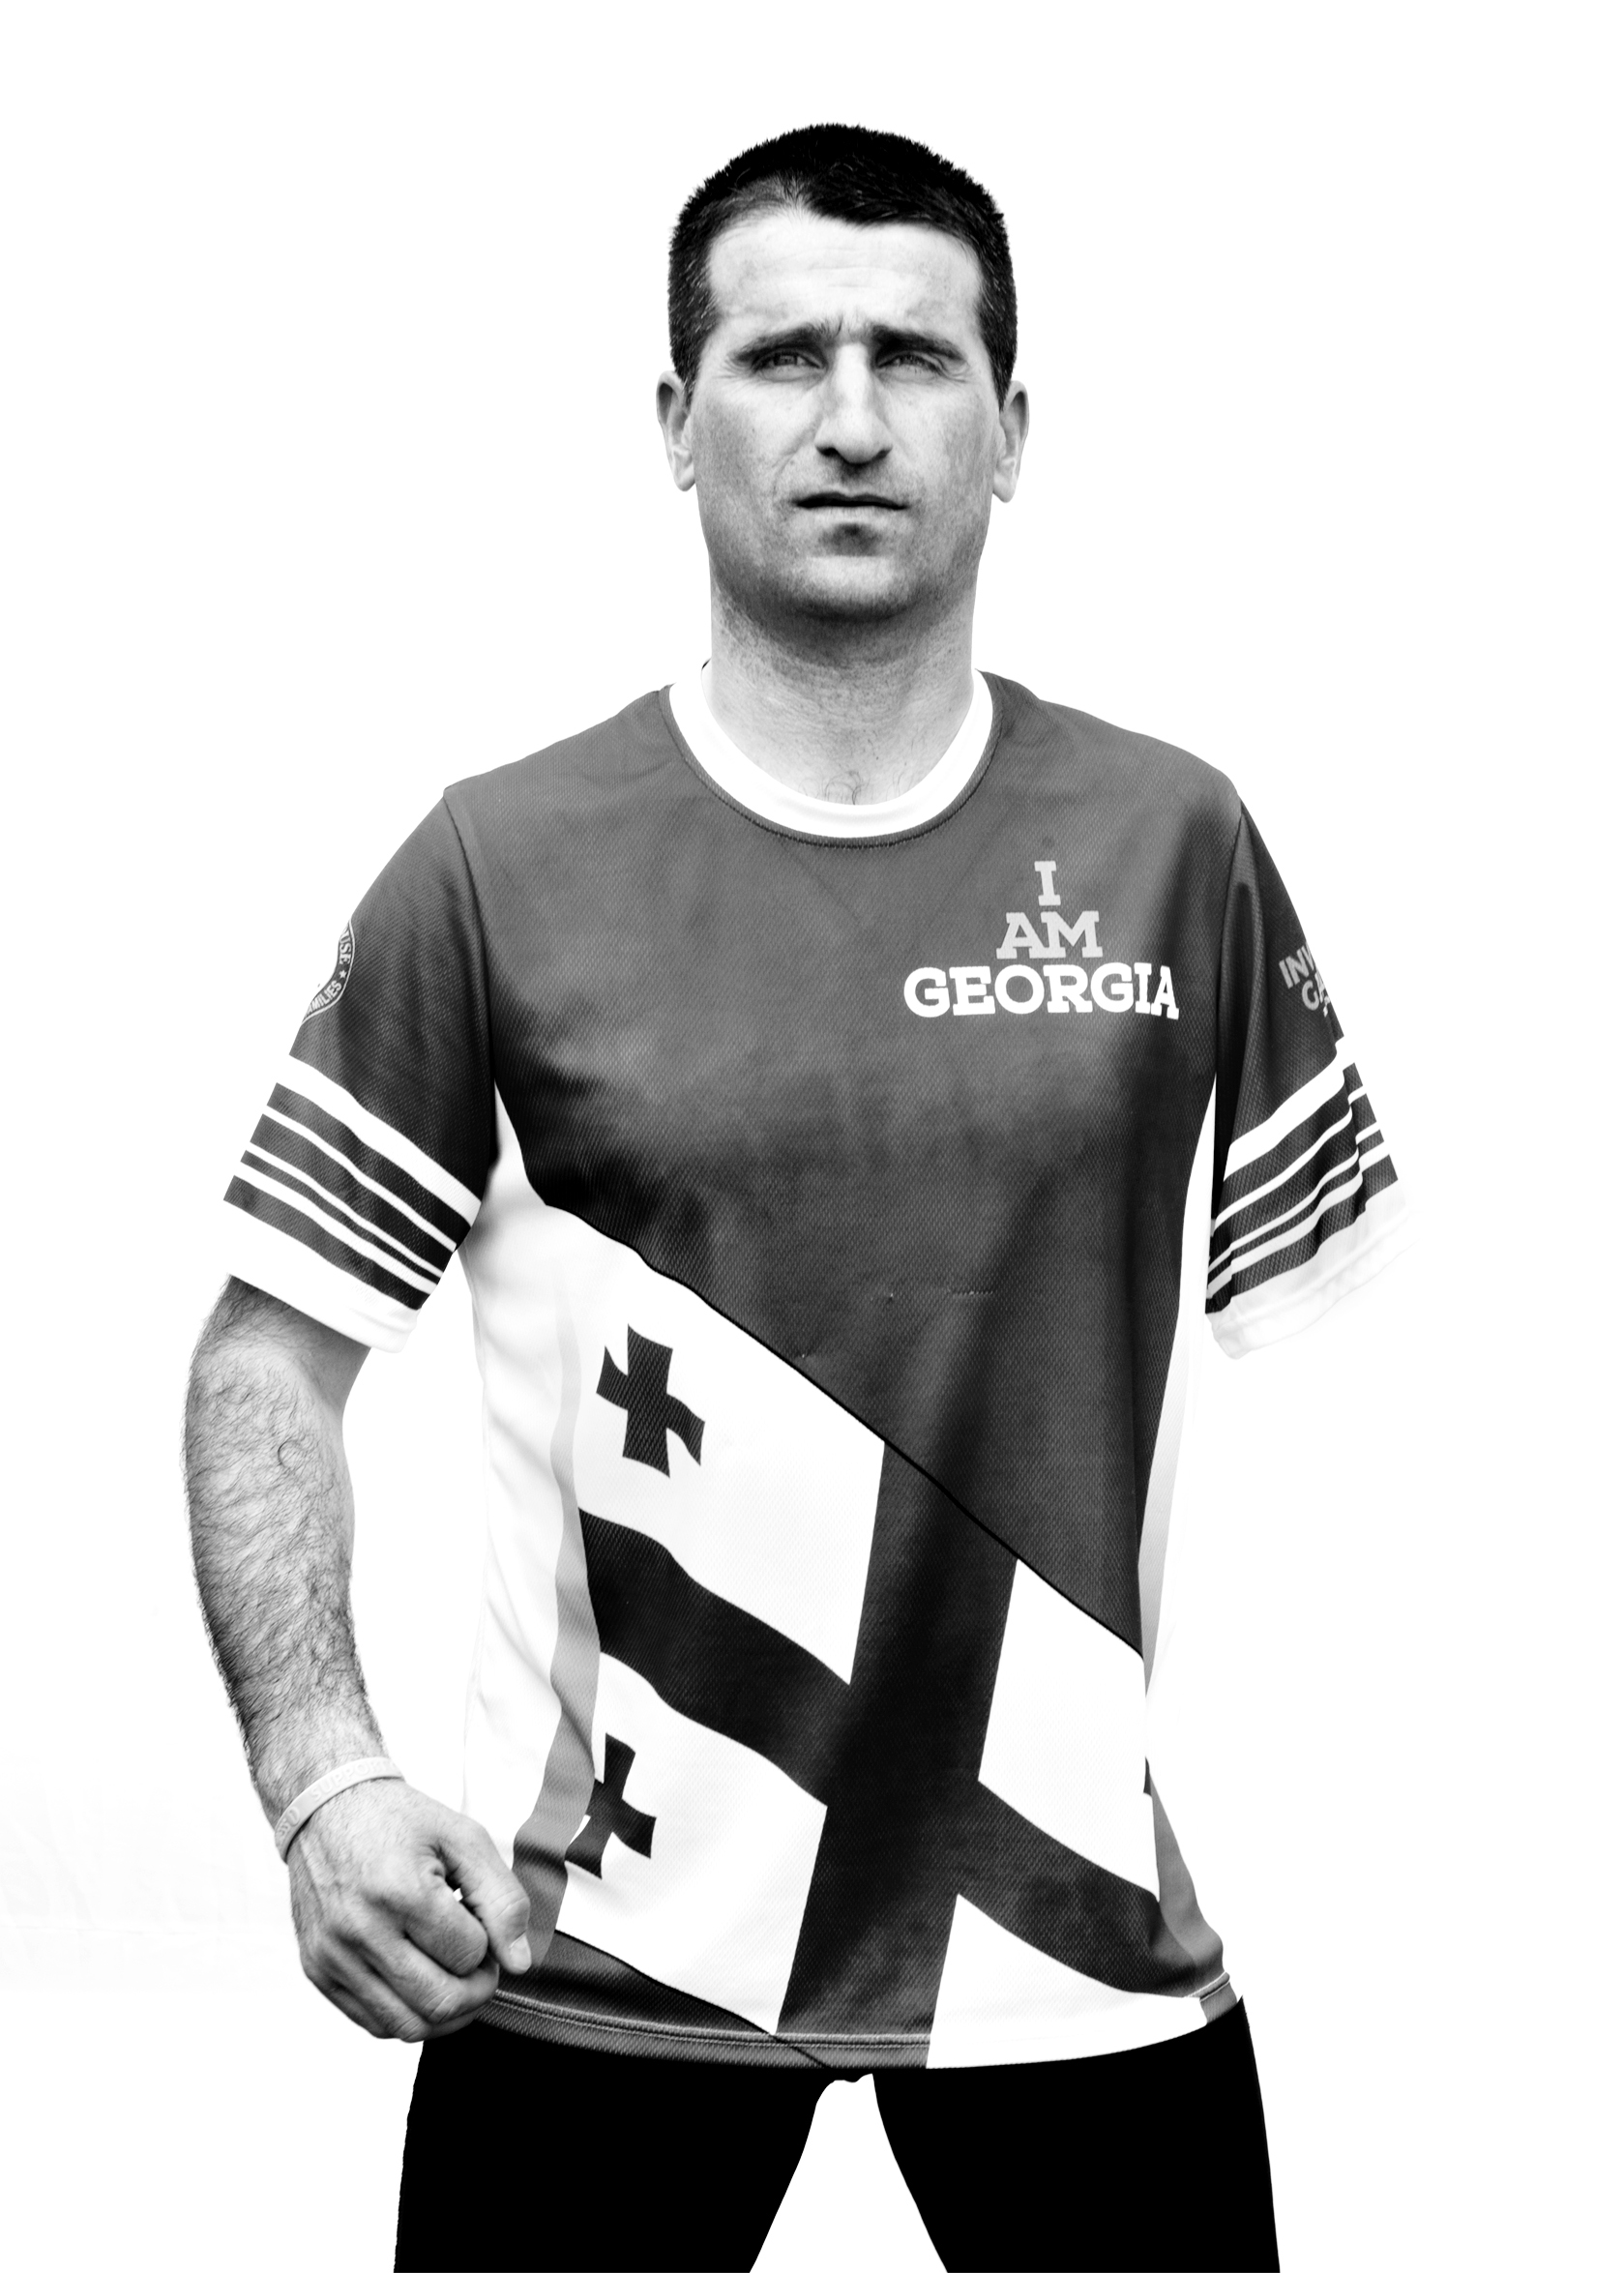 Otar Doijashvili, Georgia, competed in sitting volleyball and rowing